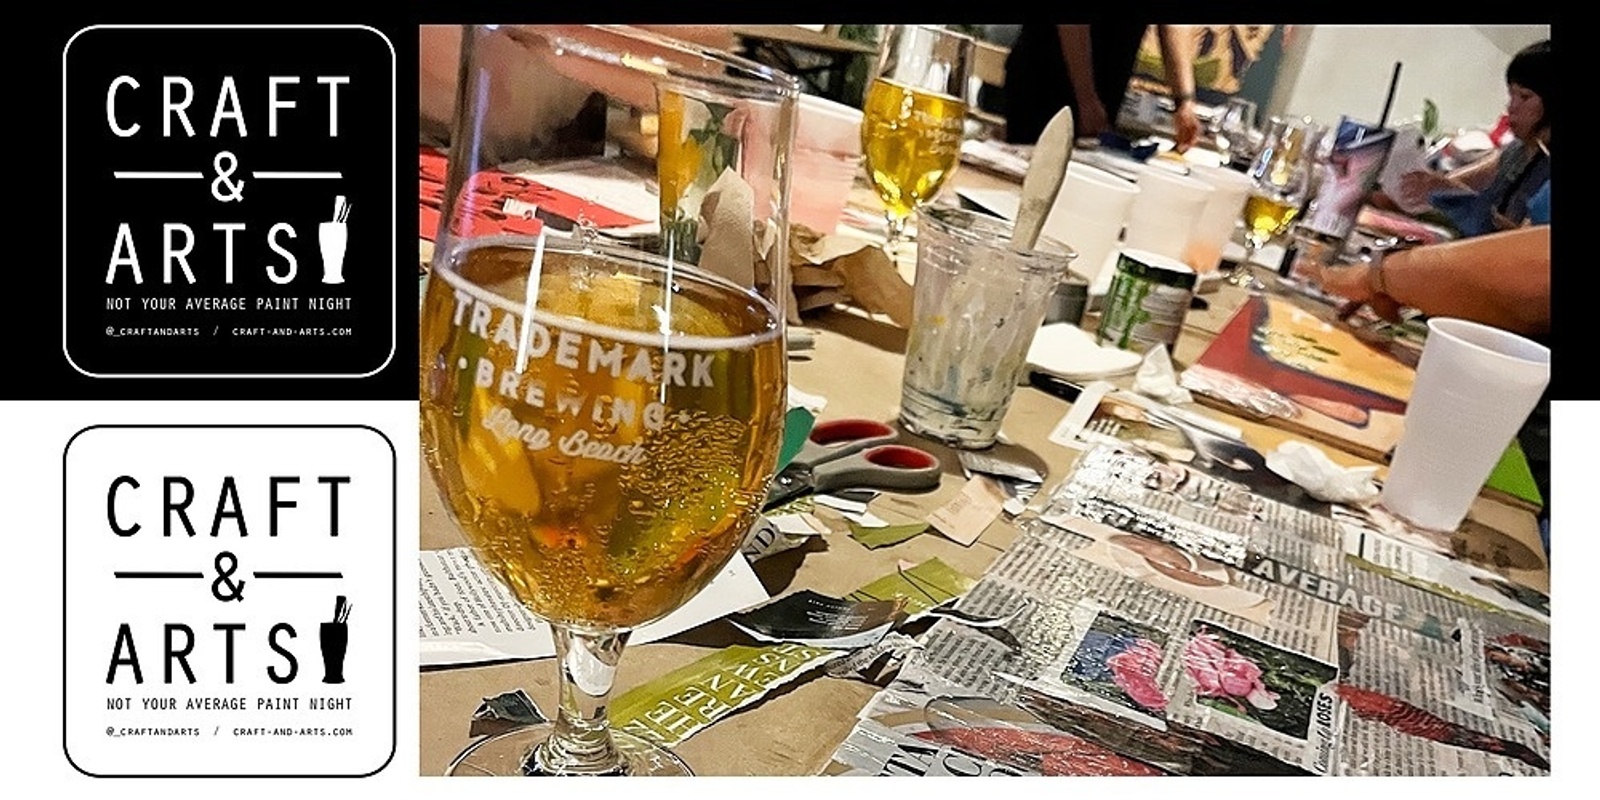 Banner image for CRAFT & ARTS - Trademark Brewing